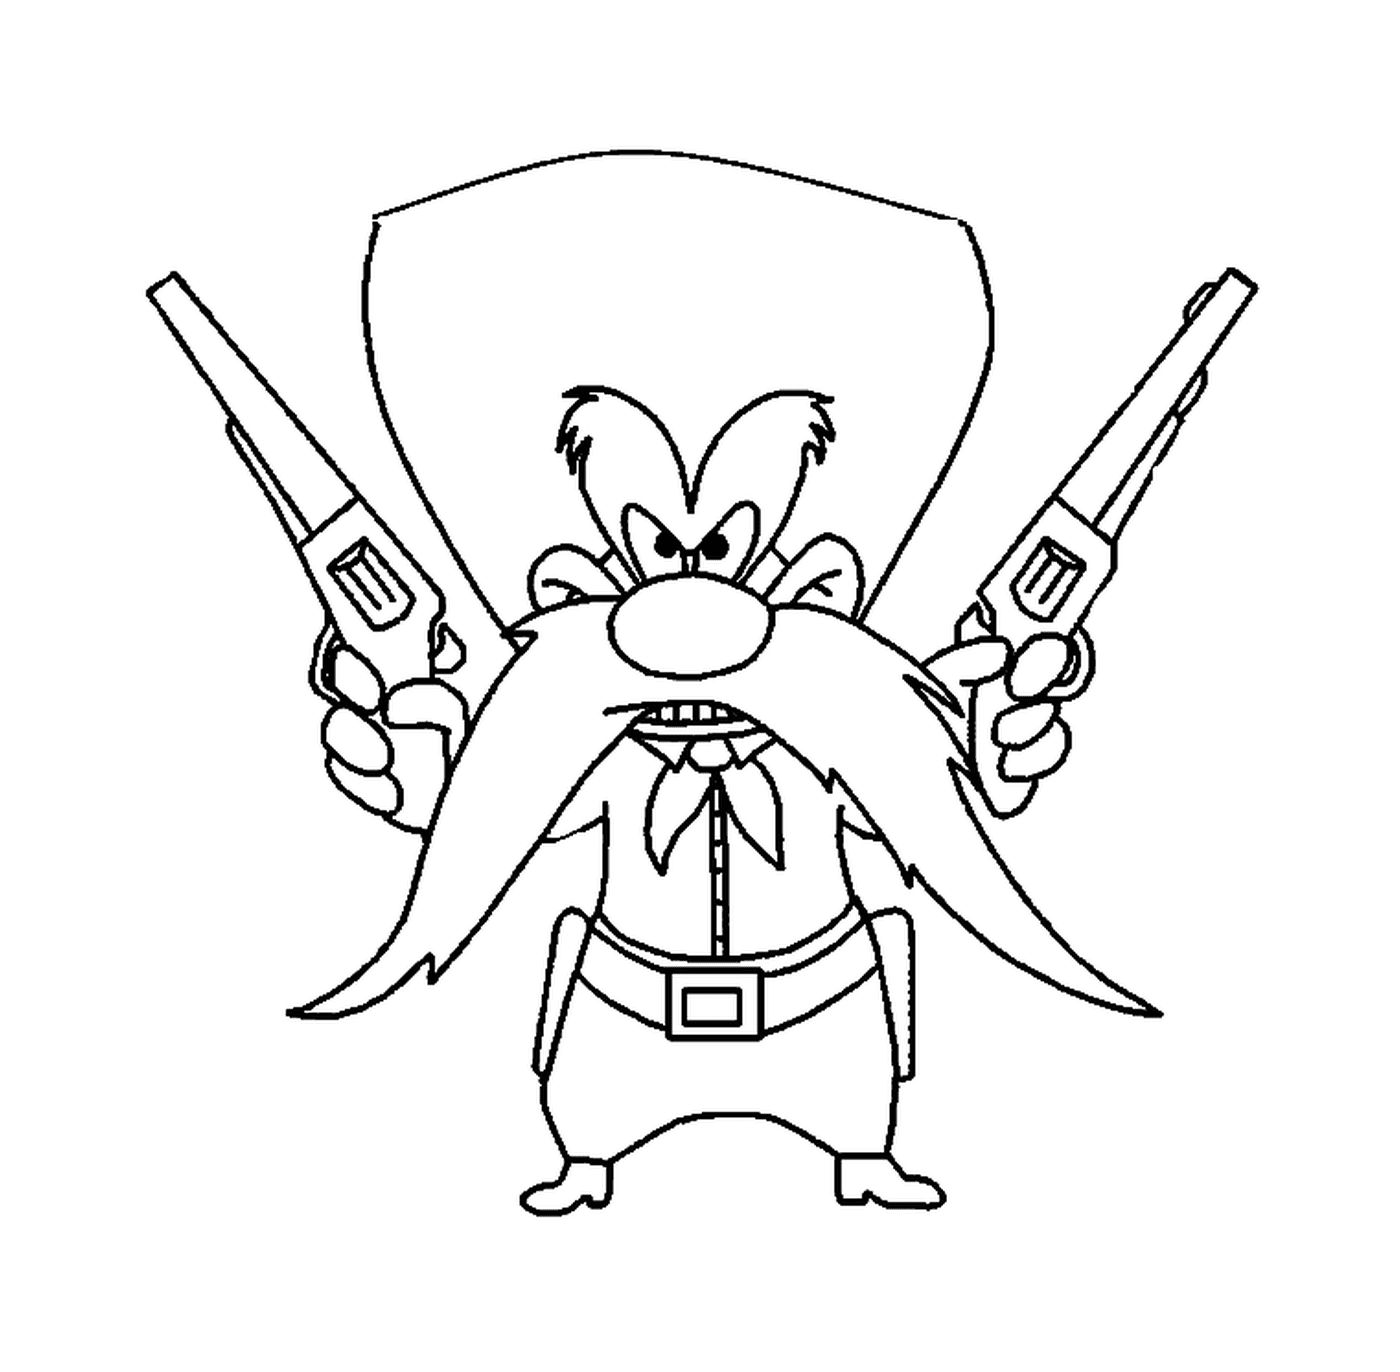  Sam the pirate, an old man armed 